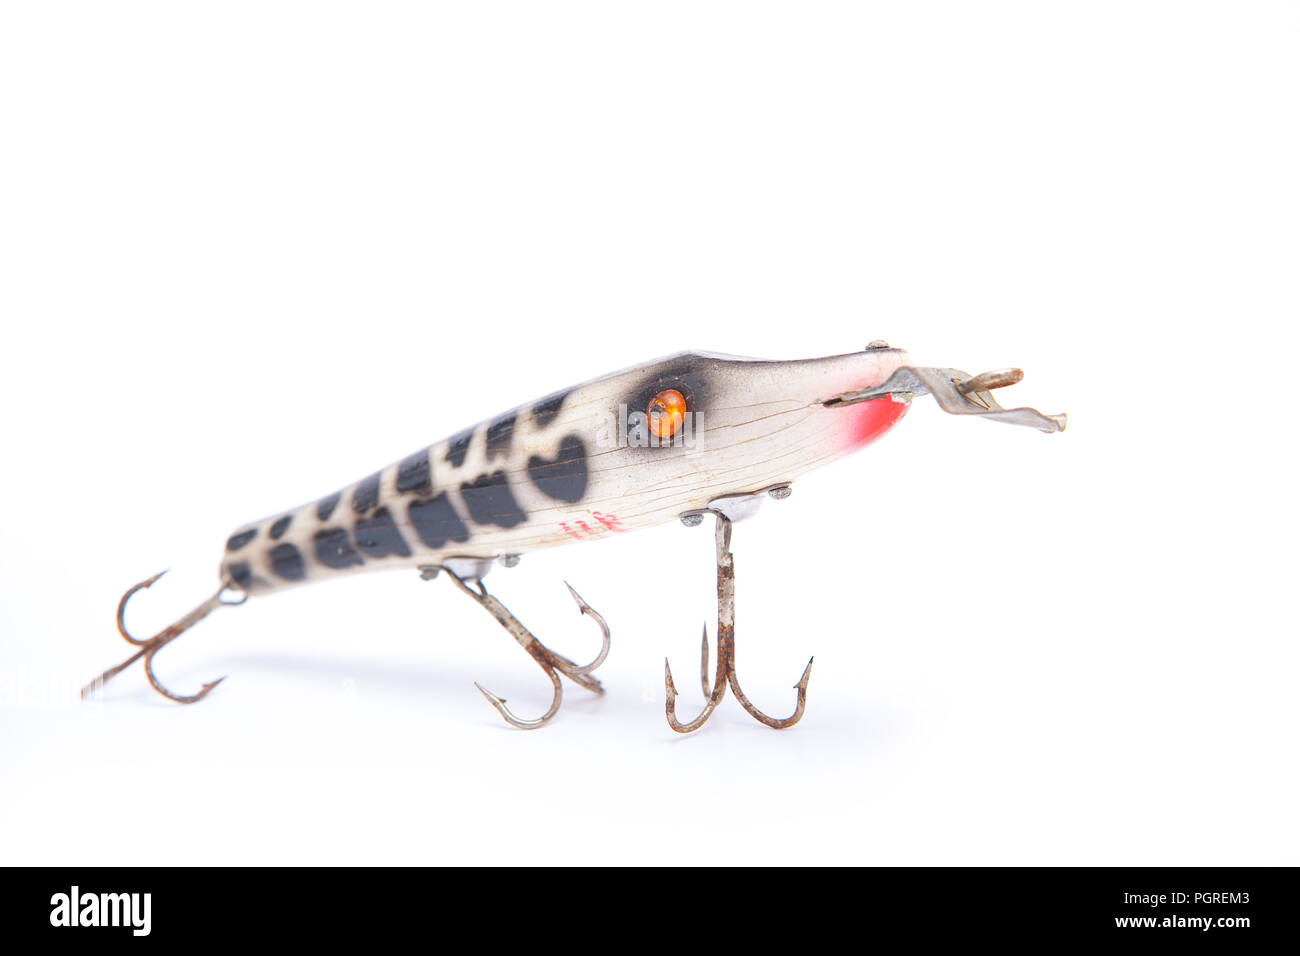 https://c8.alamy.com/comp/PGREM3/an-old-wooden-shakespeare-fishing-lure-or-plug-equipped-with-three-treble-hooks-and-designed-to-dive-whe-it-is-reeled-in-from-a-collection-of-vinta-PGREM3.jpg